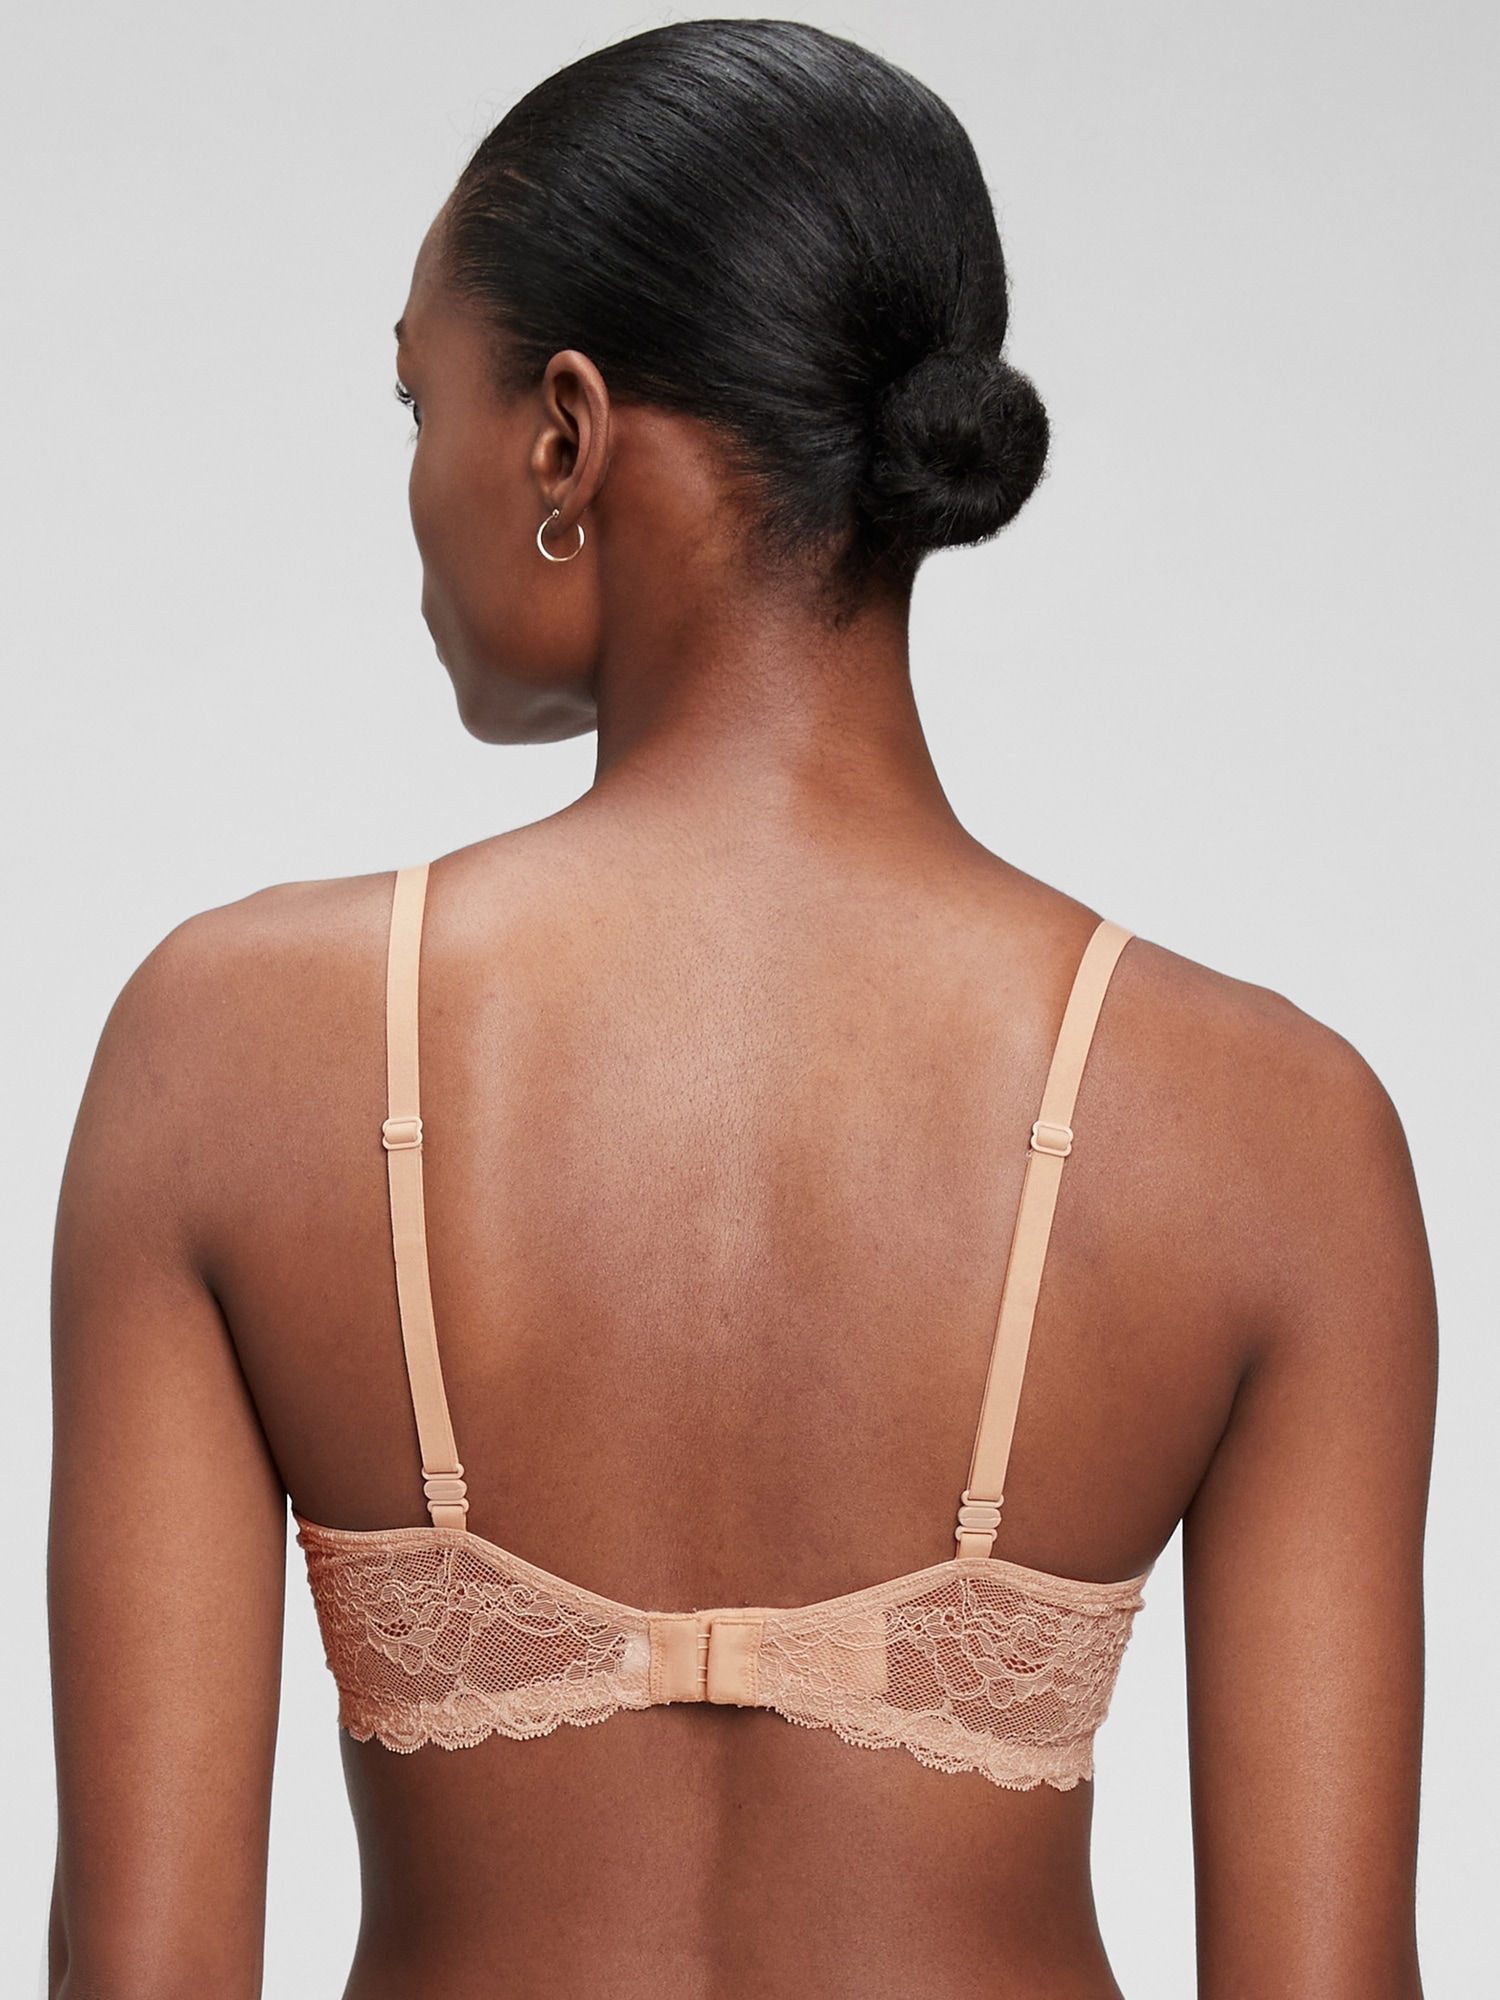 Underwire bra with lace back